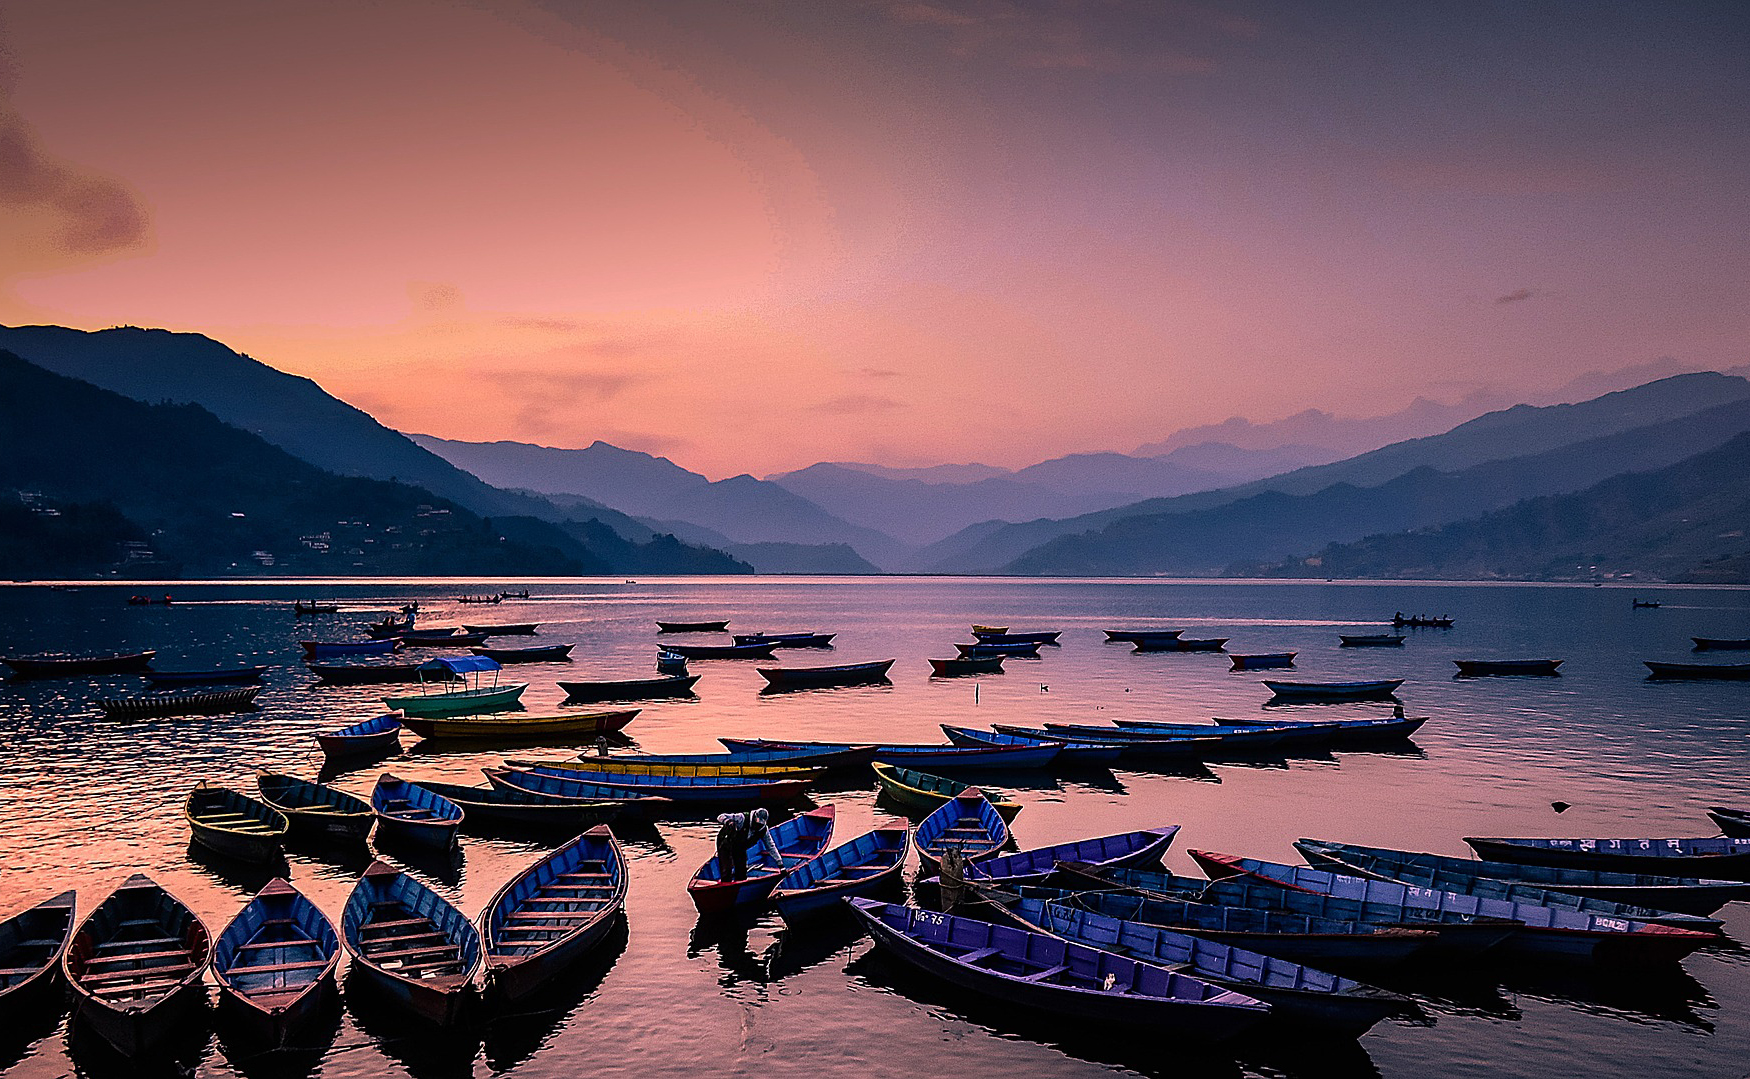 Pokhara - How to spend two weeks in Nepal